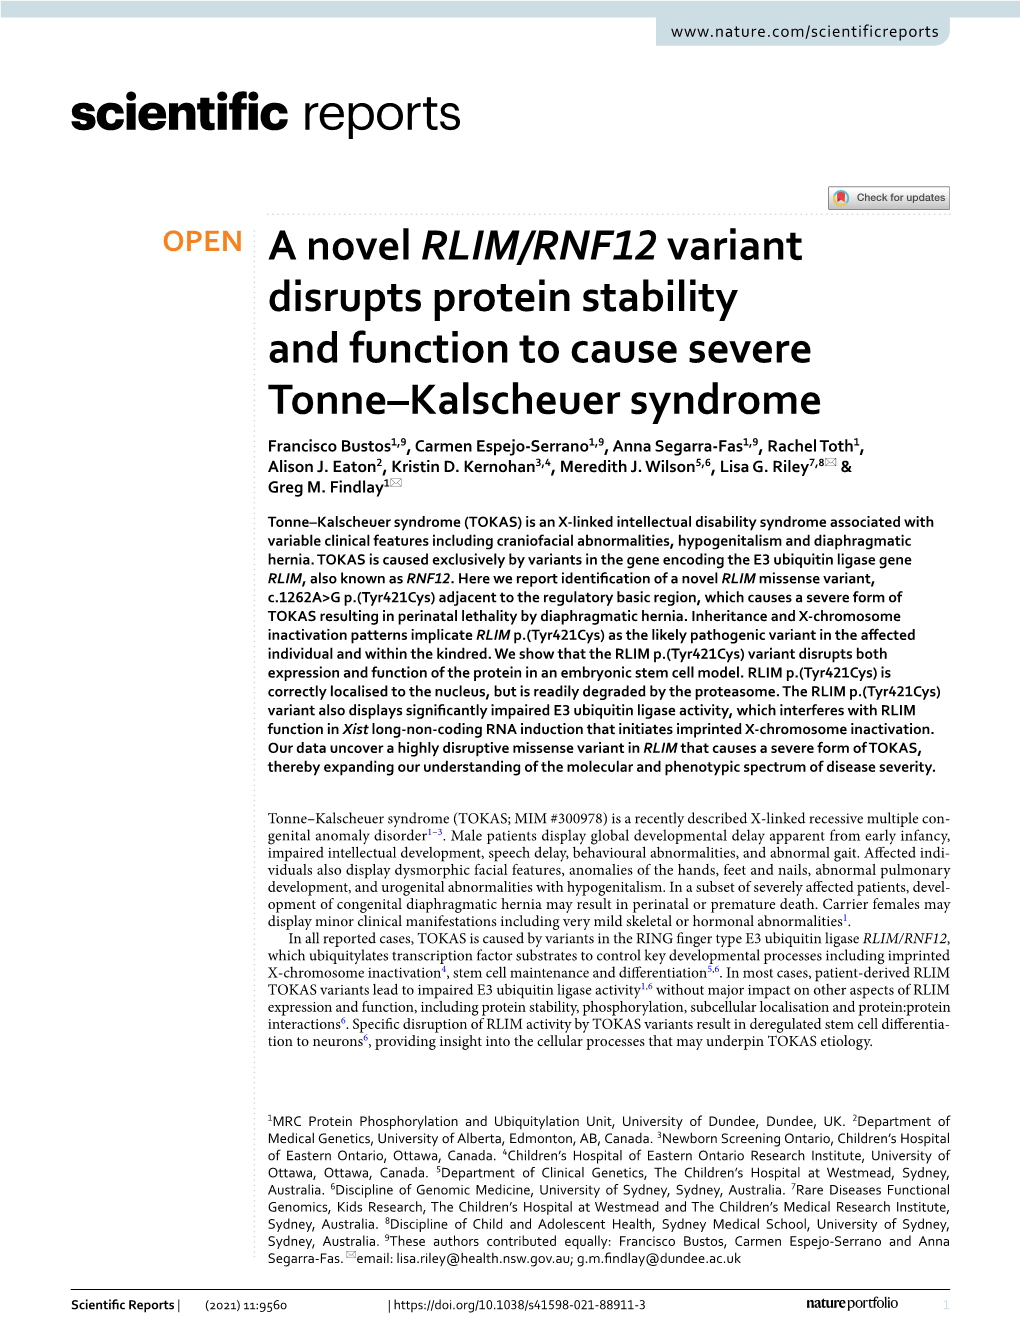 A Novel RLIM/RNF12 Variant Disrupts Protein Stability and Function To